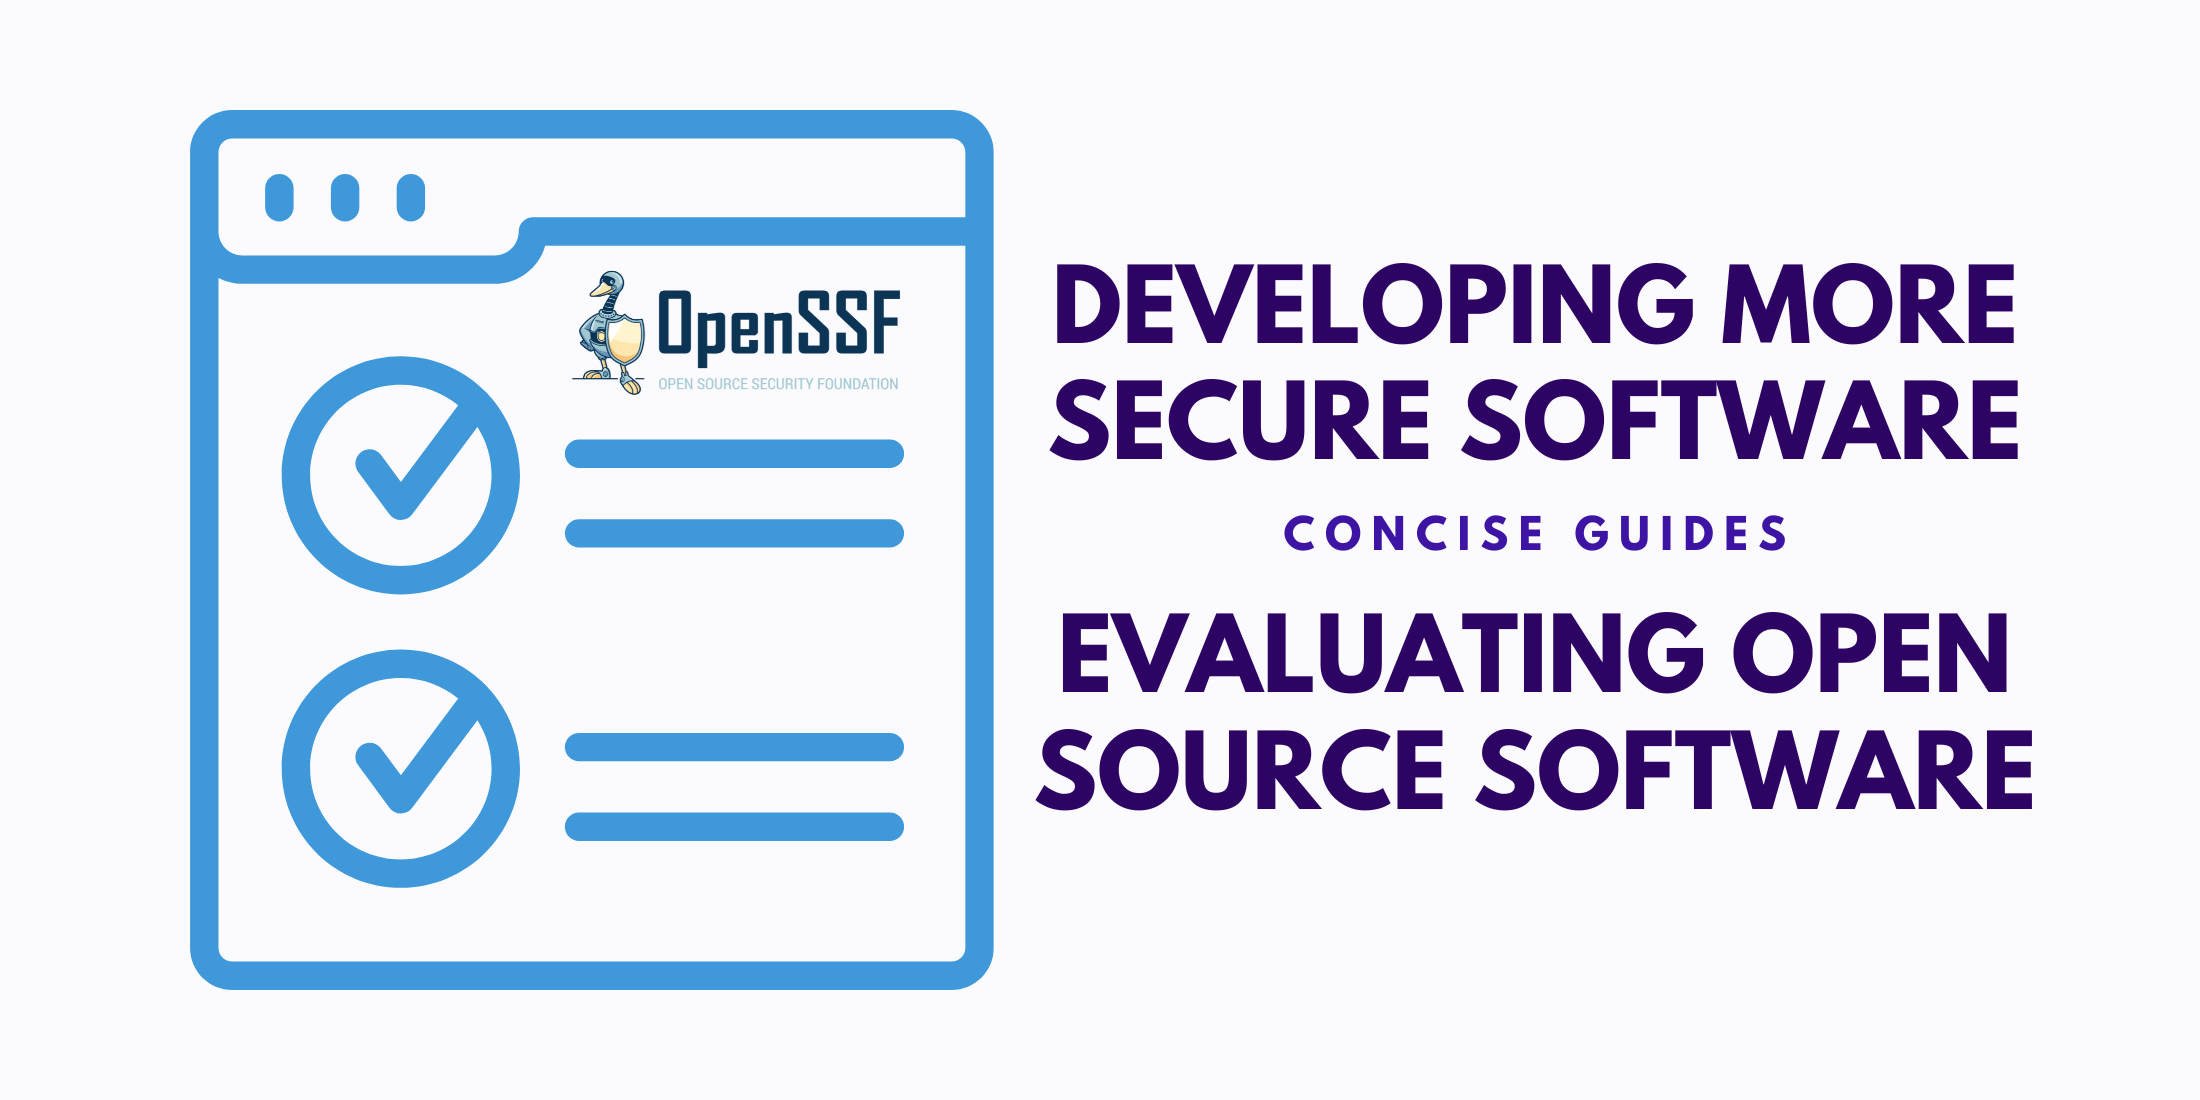 Concise Guides OpenSSF - Developing More Secure Software Evaluating Open Source Software